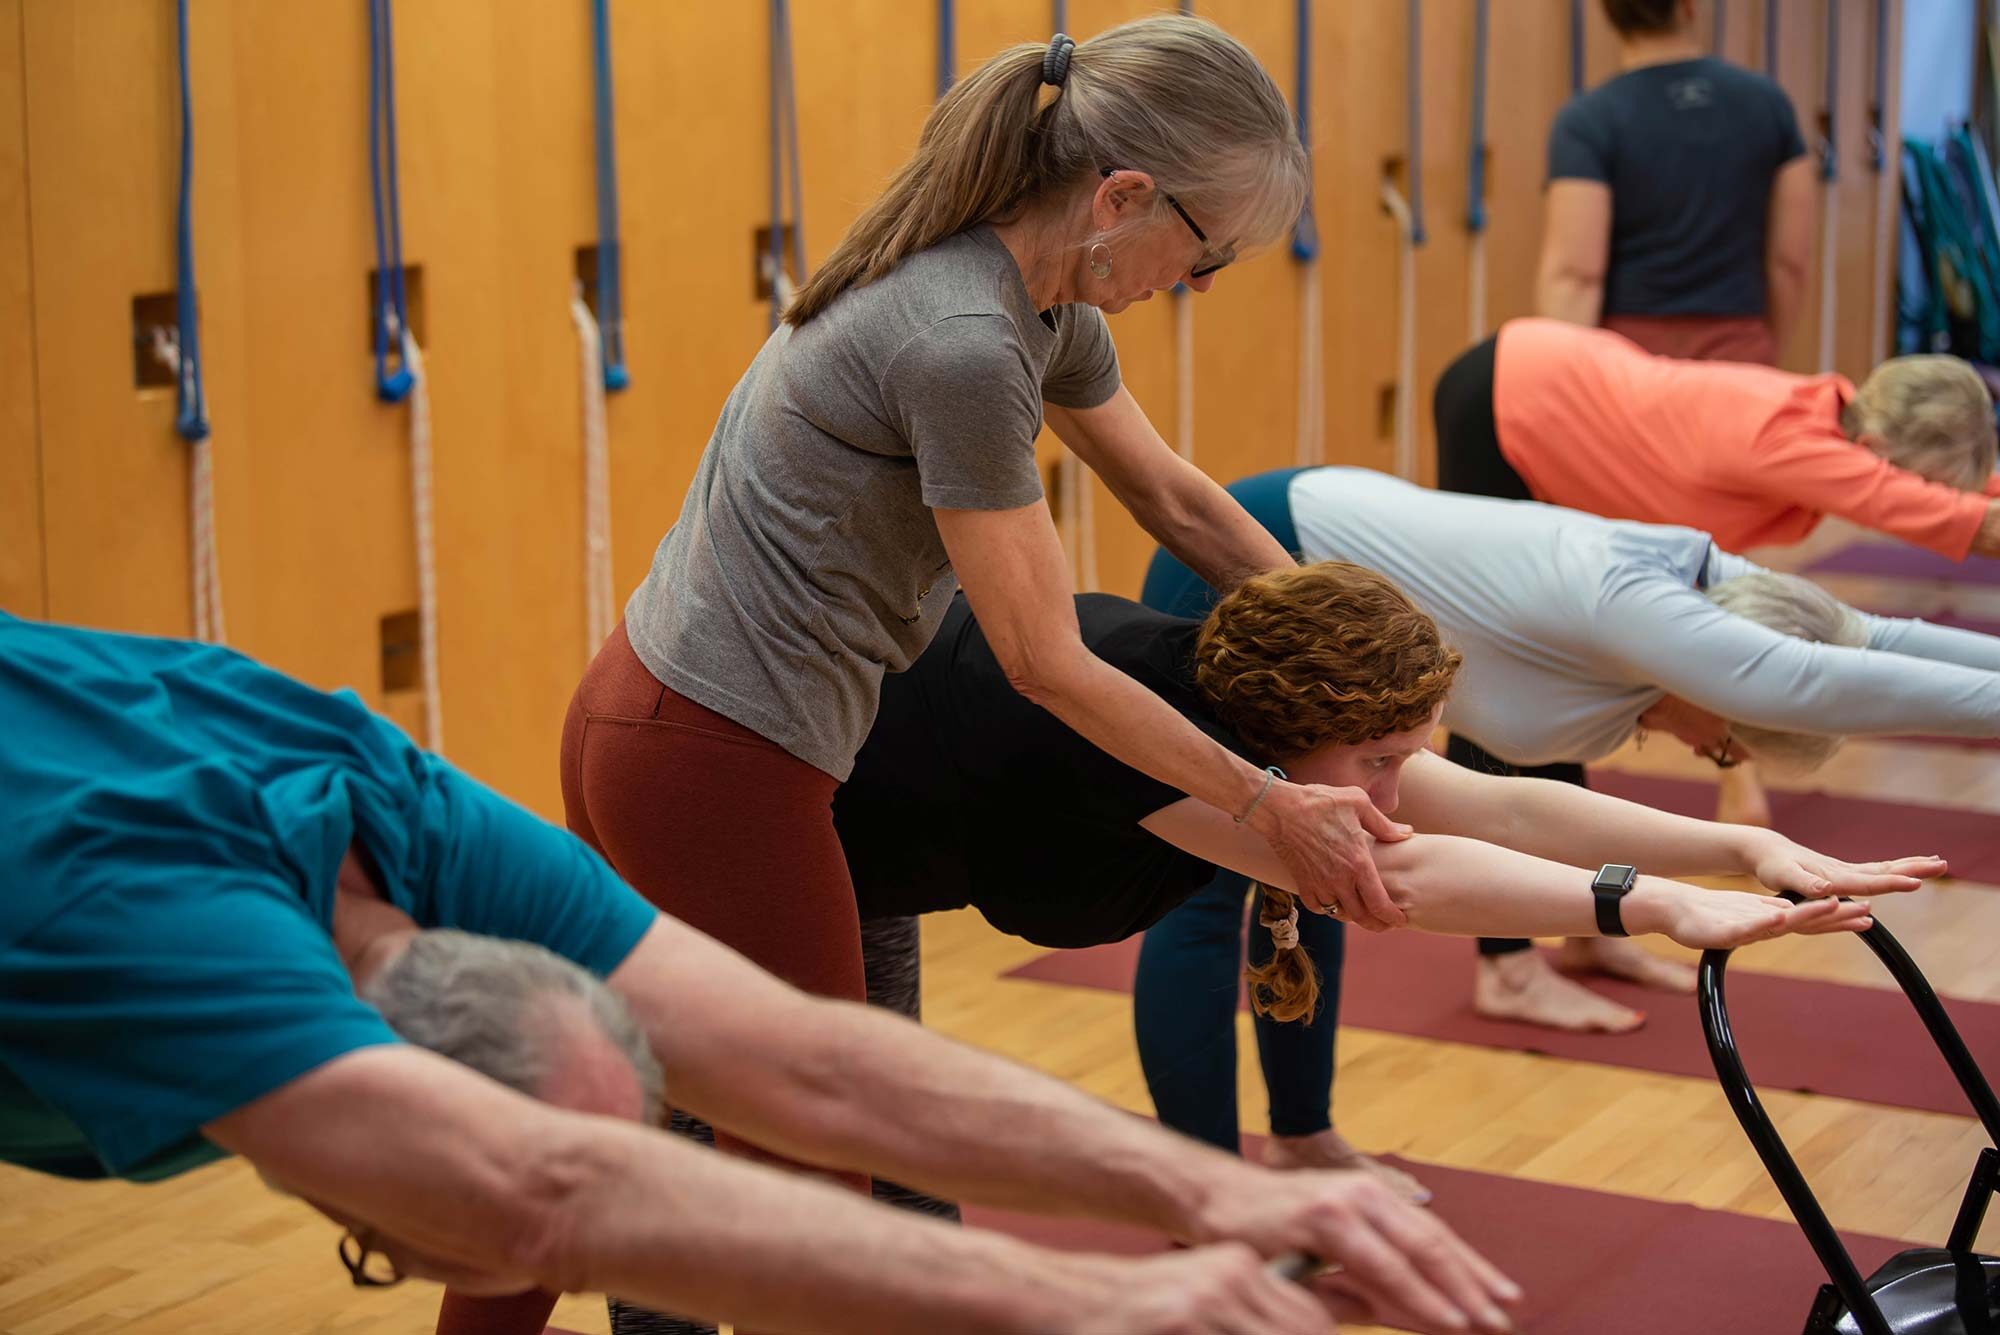 Pam owner yoga place guiding student